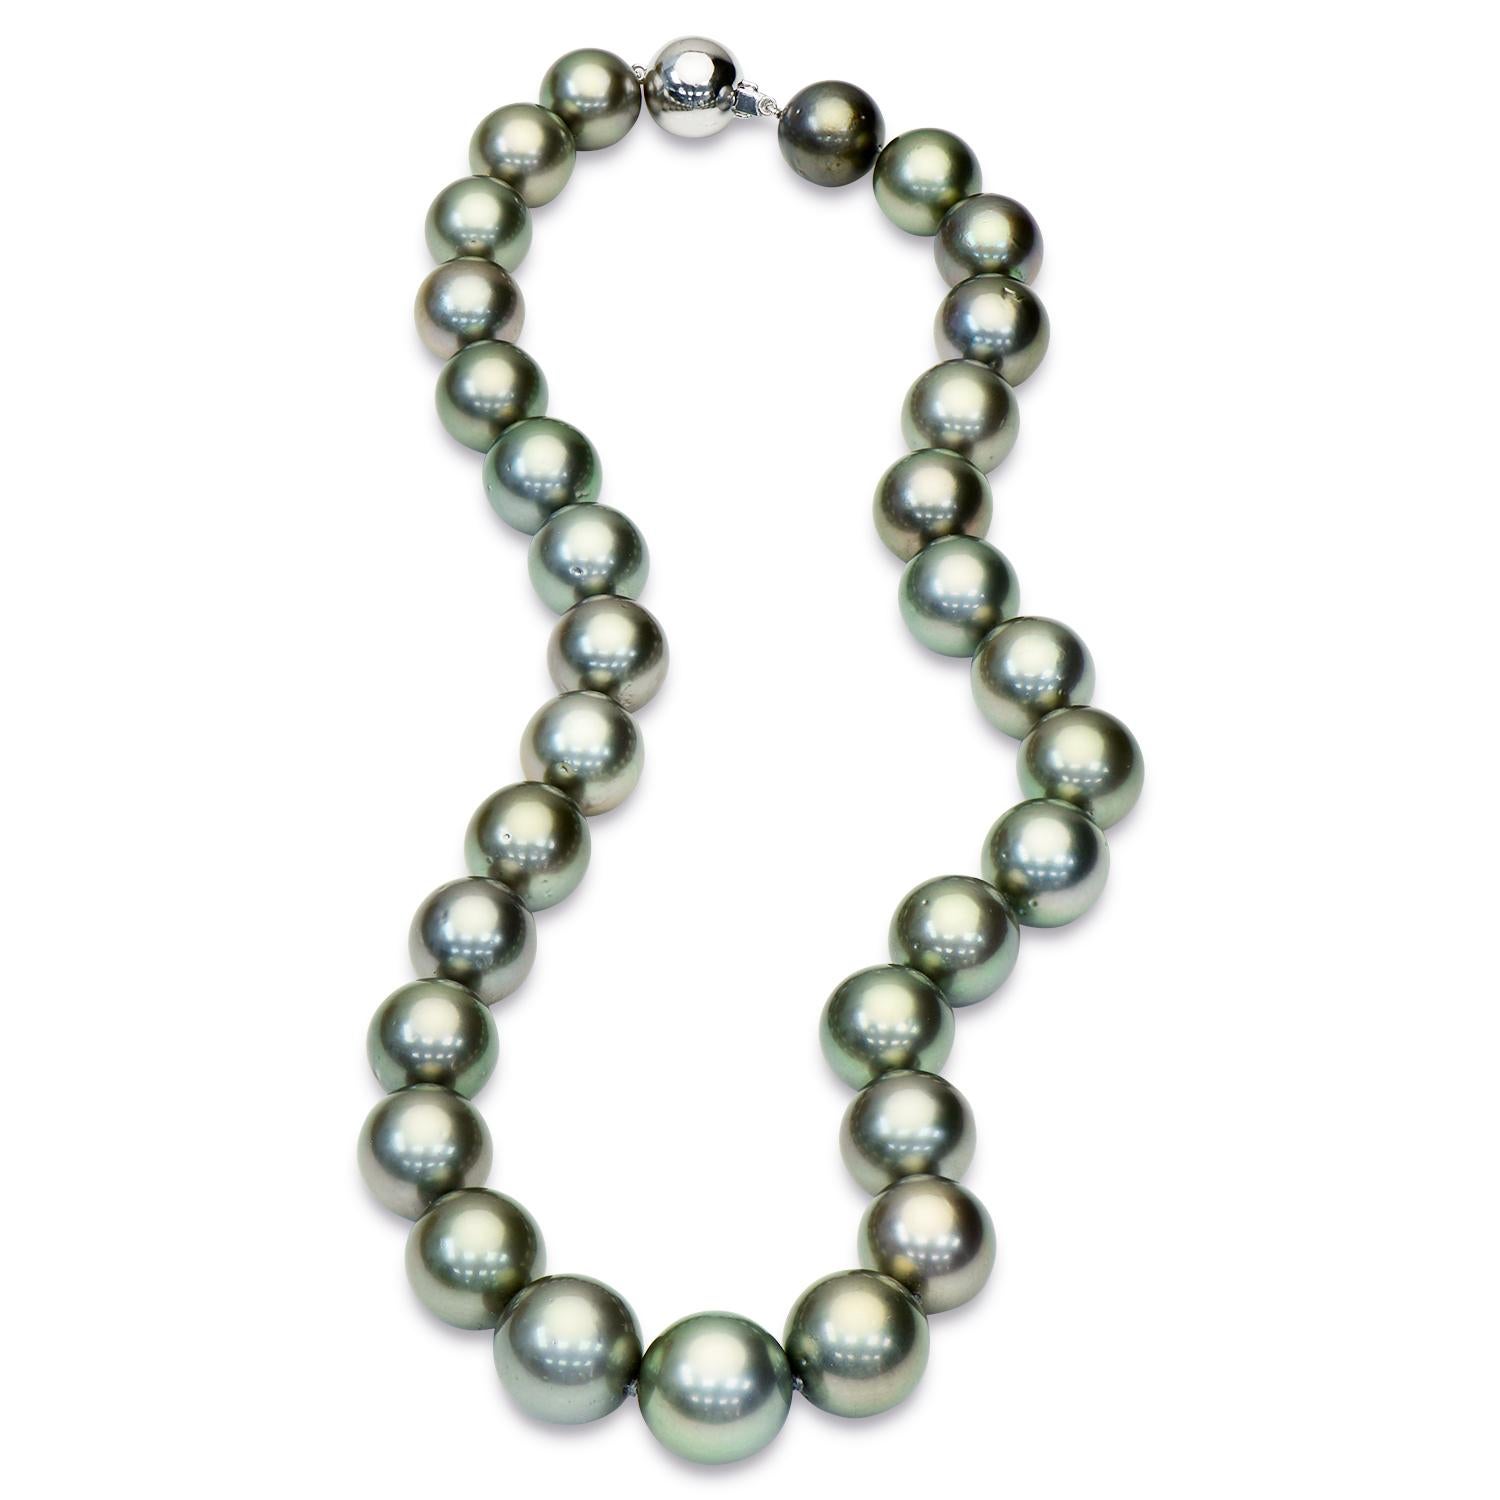 Style and glamour are in the spotlight with this exquisite Tahitian necklace. This 14-karat round-cut necklace is made from 31 pearls with a solid white gold ball clasp. The size of the pearls is 12-14 mm. The length of this necklace is 17 1/2